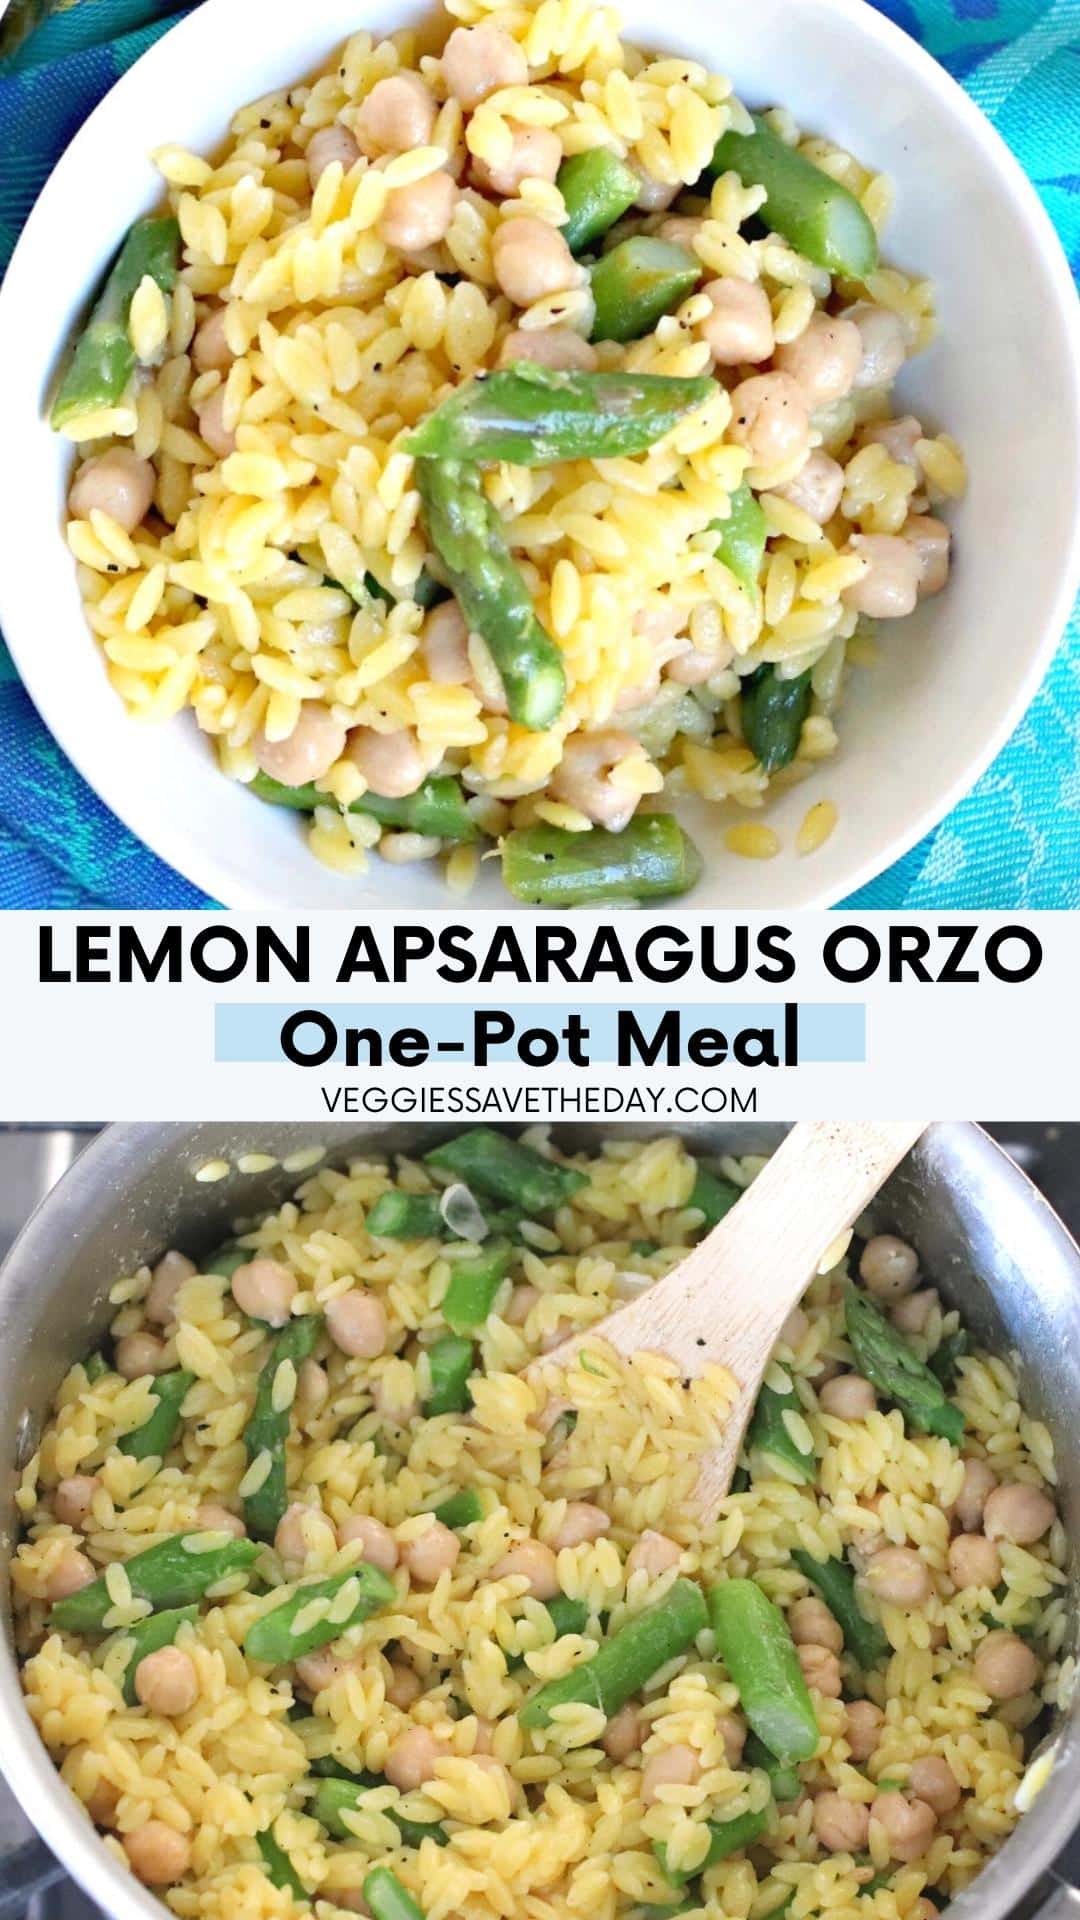 Bowl of Lemon Asparagus Orzo in top image and food cooking on the stove in bottom image.